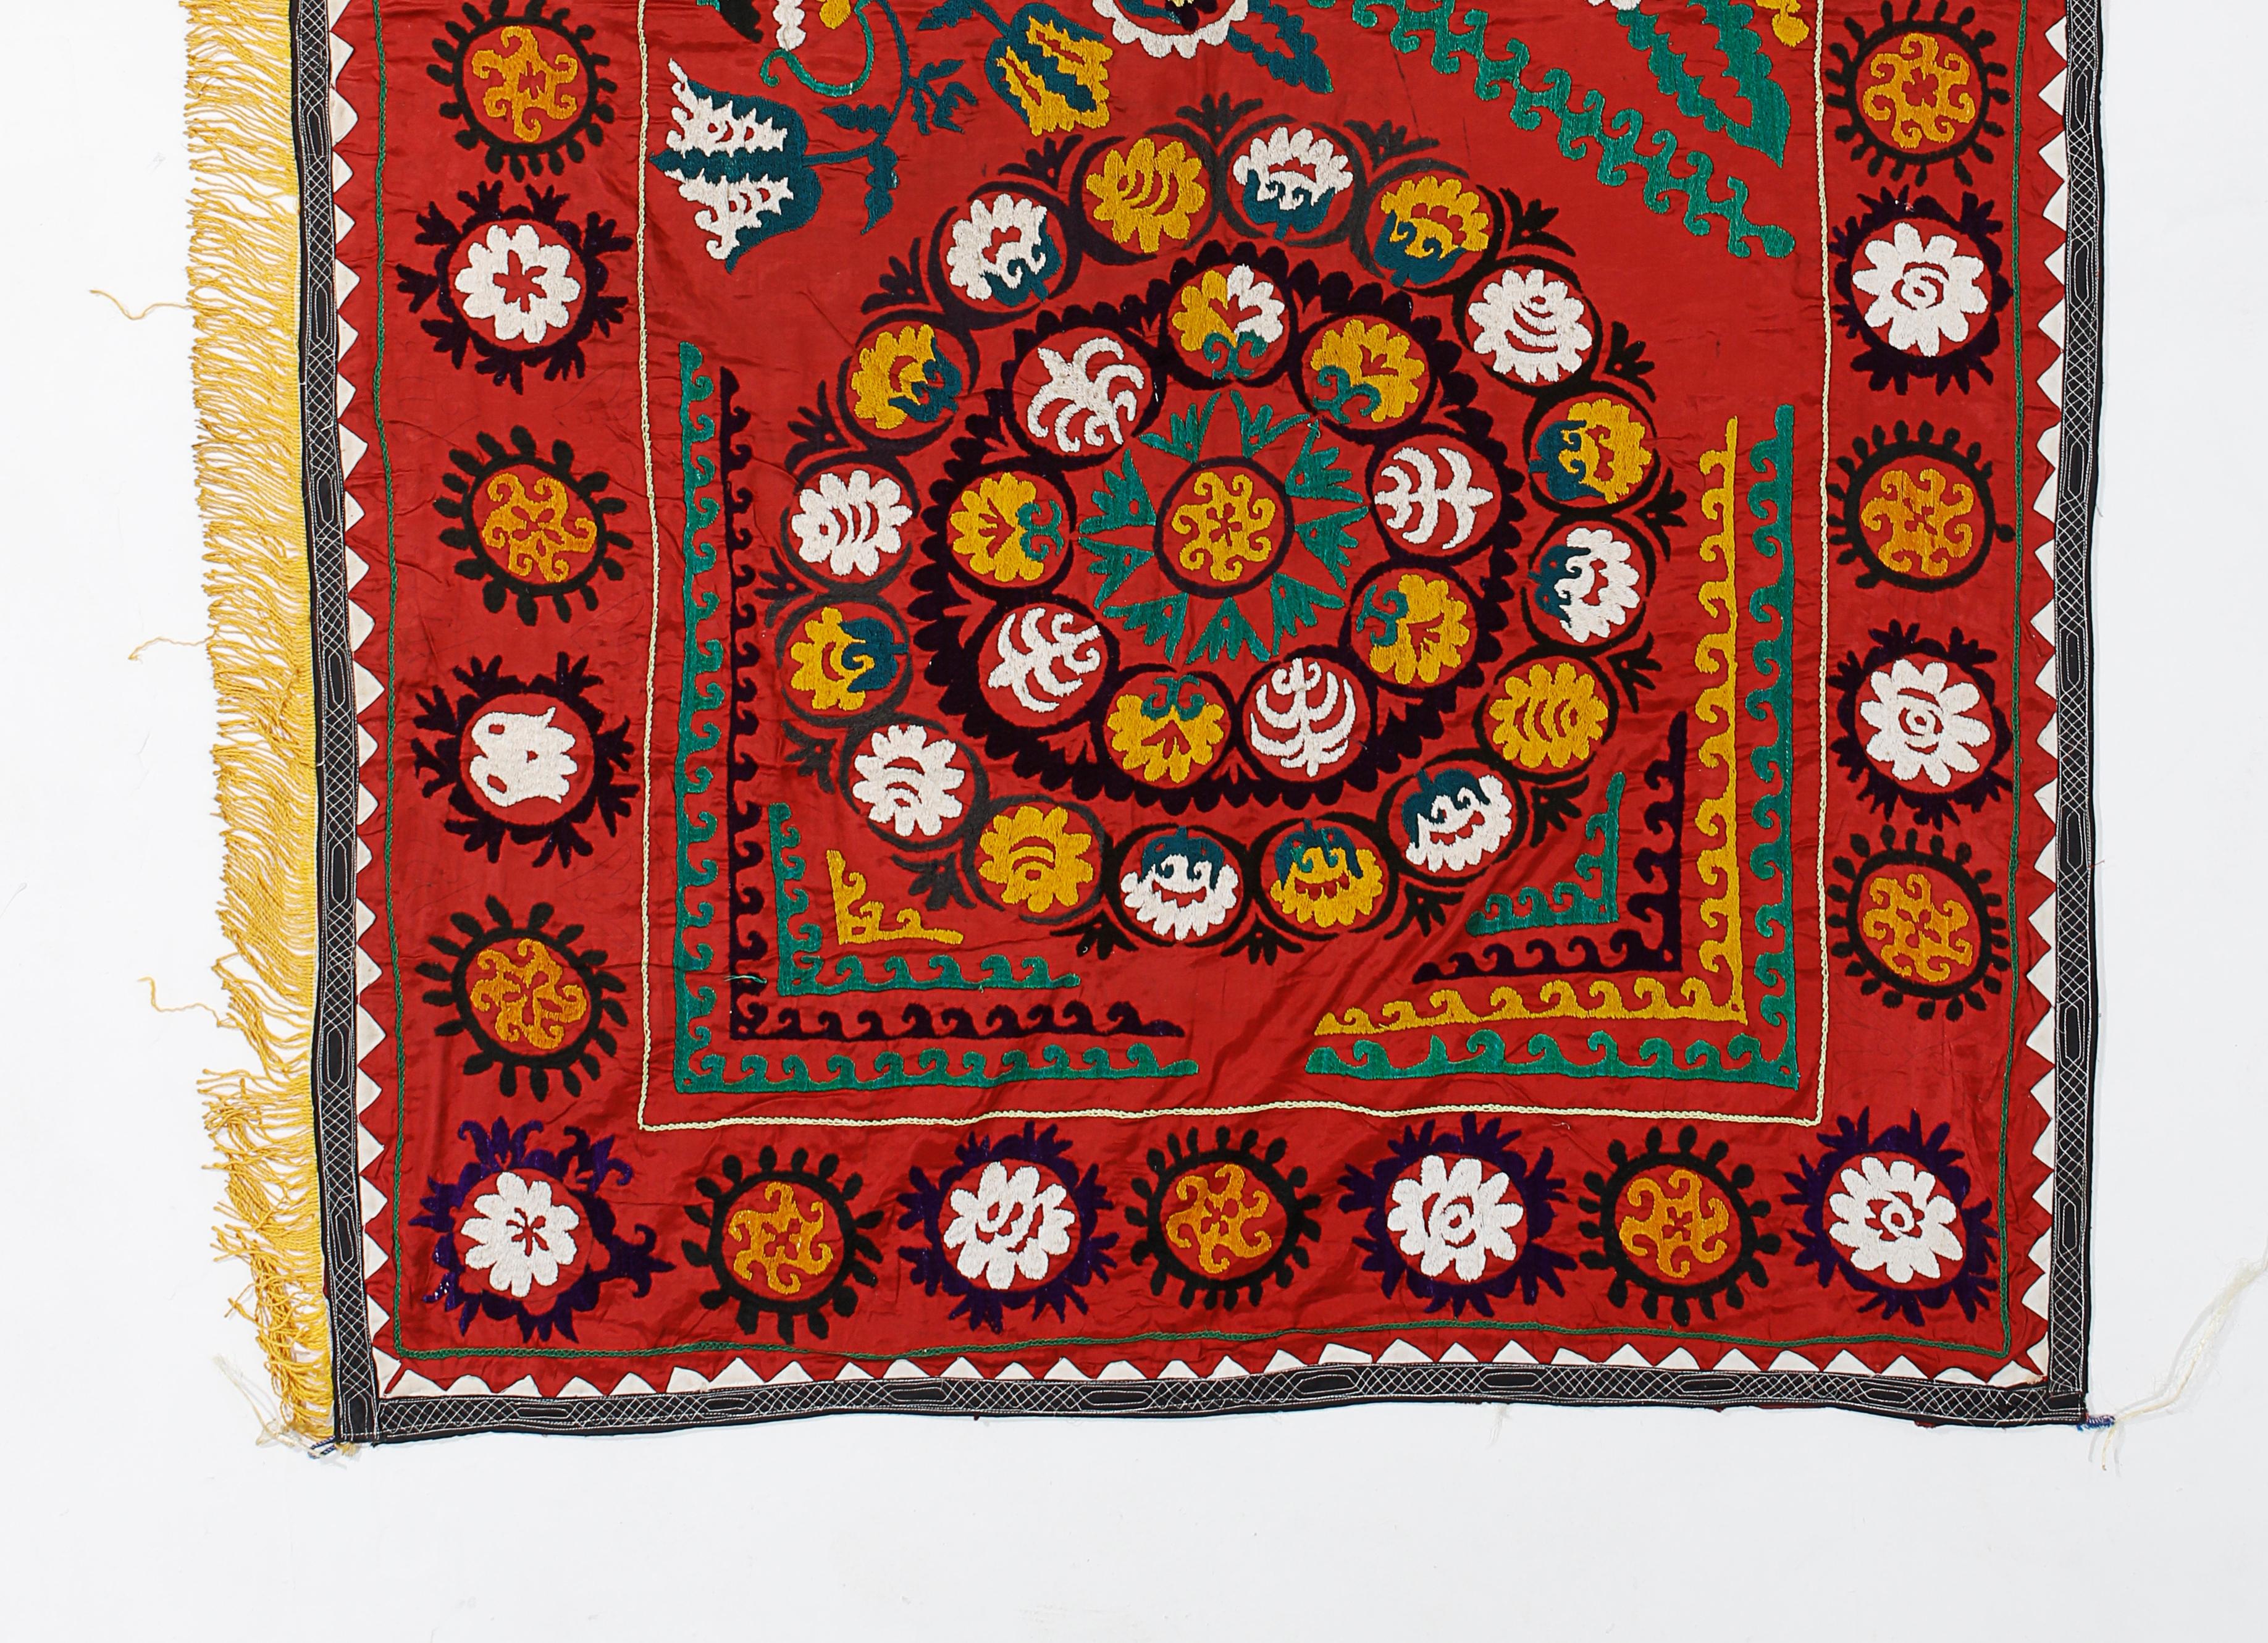 Uzbek 4.6x7.3 Ft Asian Suzani Wall Hanging, Silk EmbroideryTable Cover, Red Bedspread For Sale